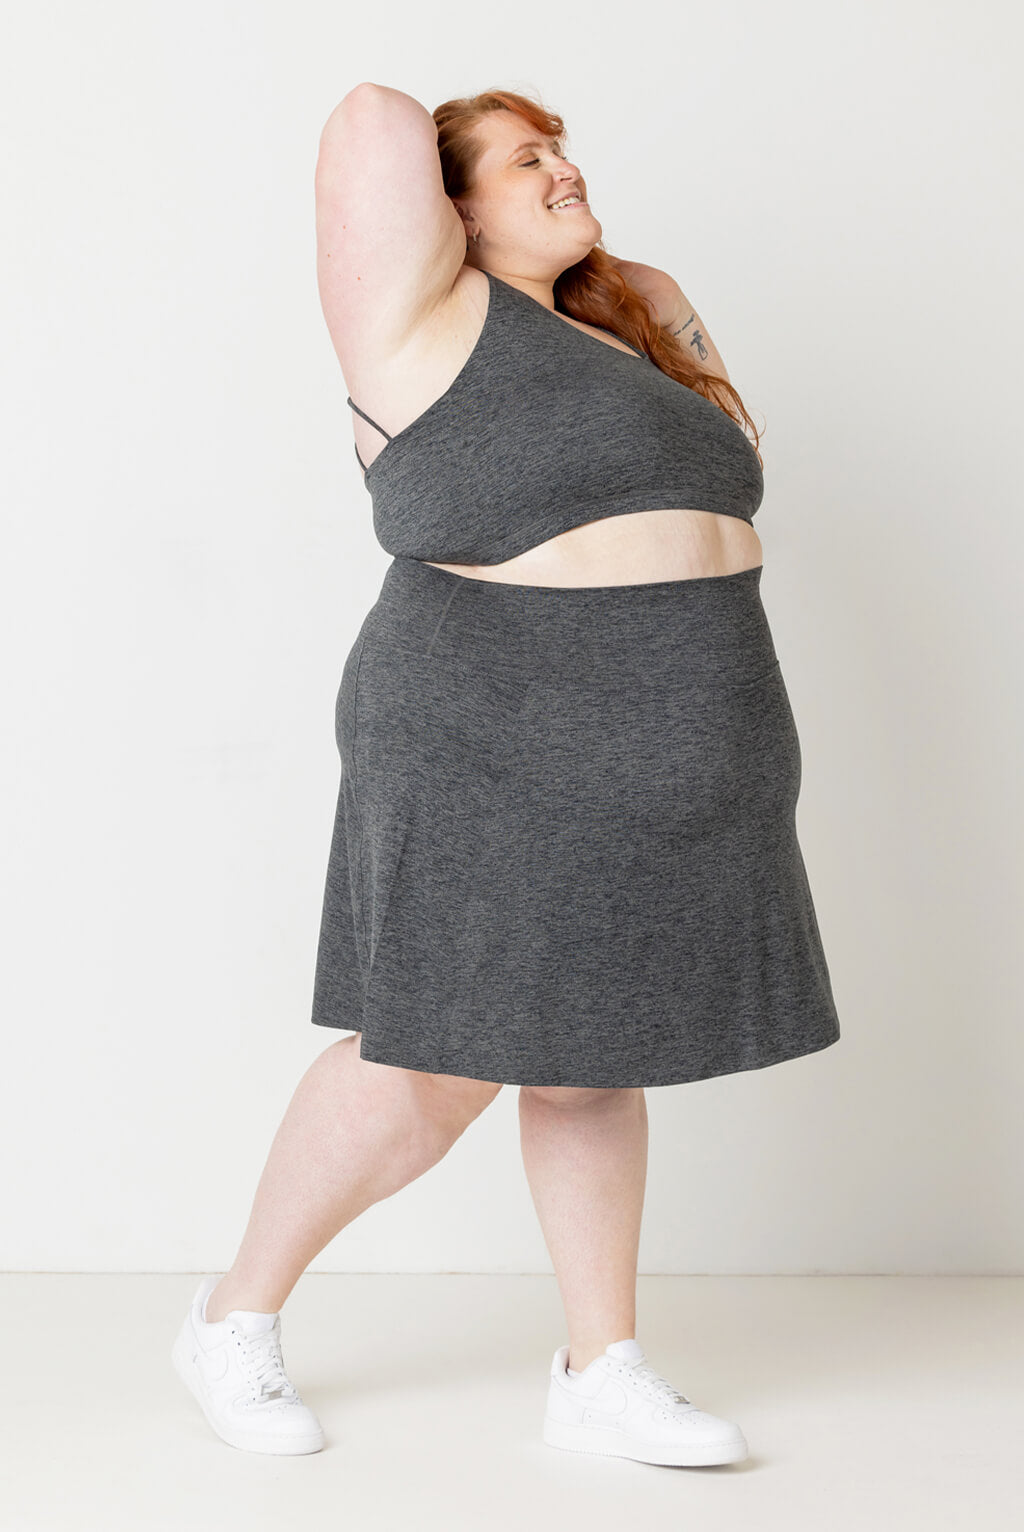 Size 5X model shows off profile of Superfit Hero SuperSoft Skort Heather Gray